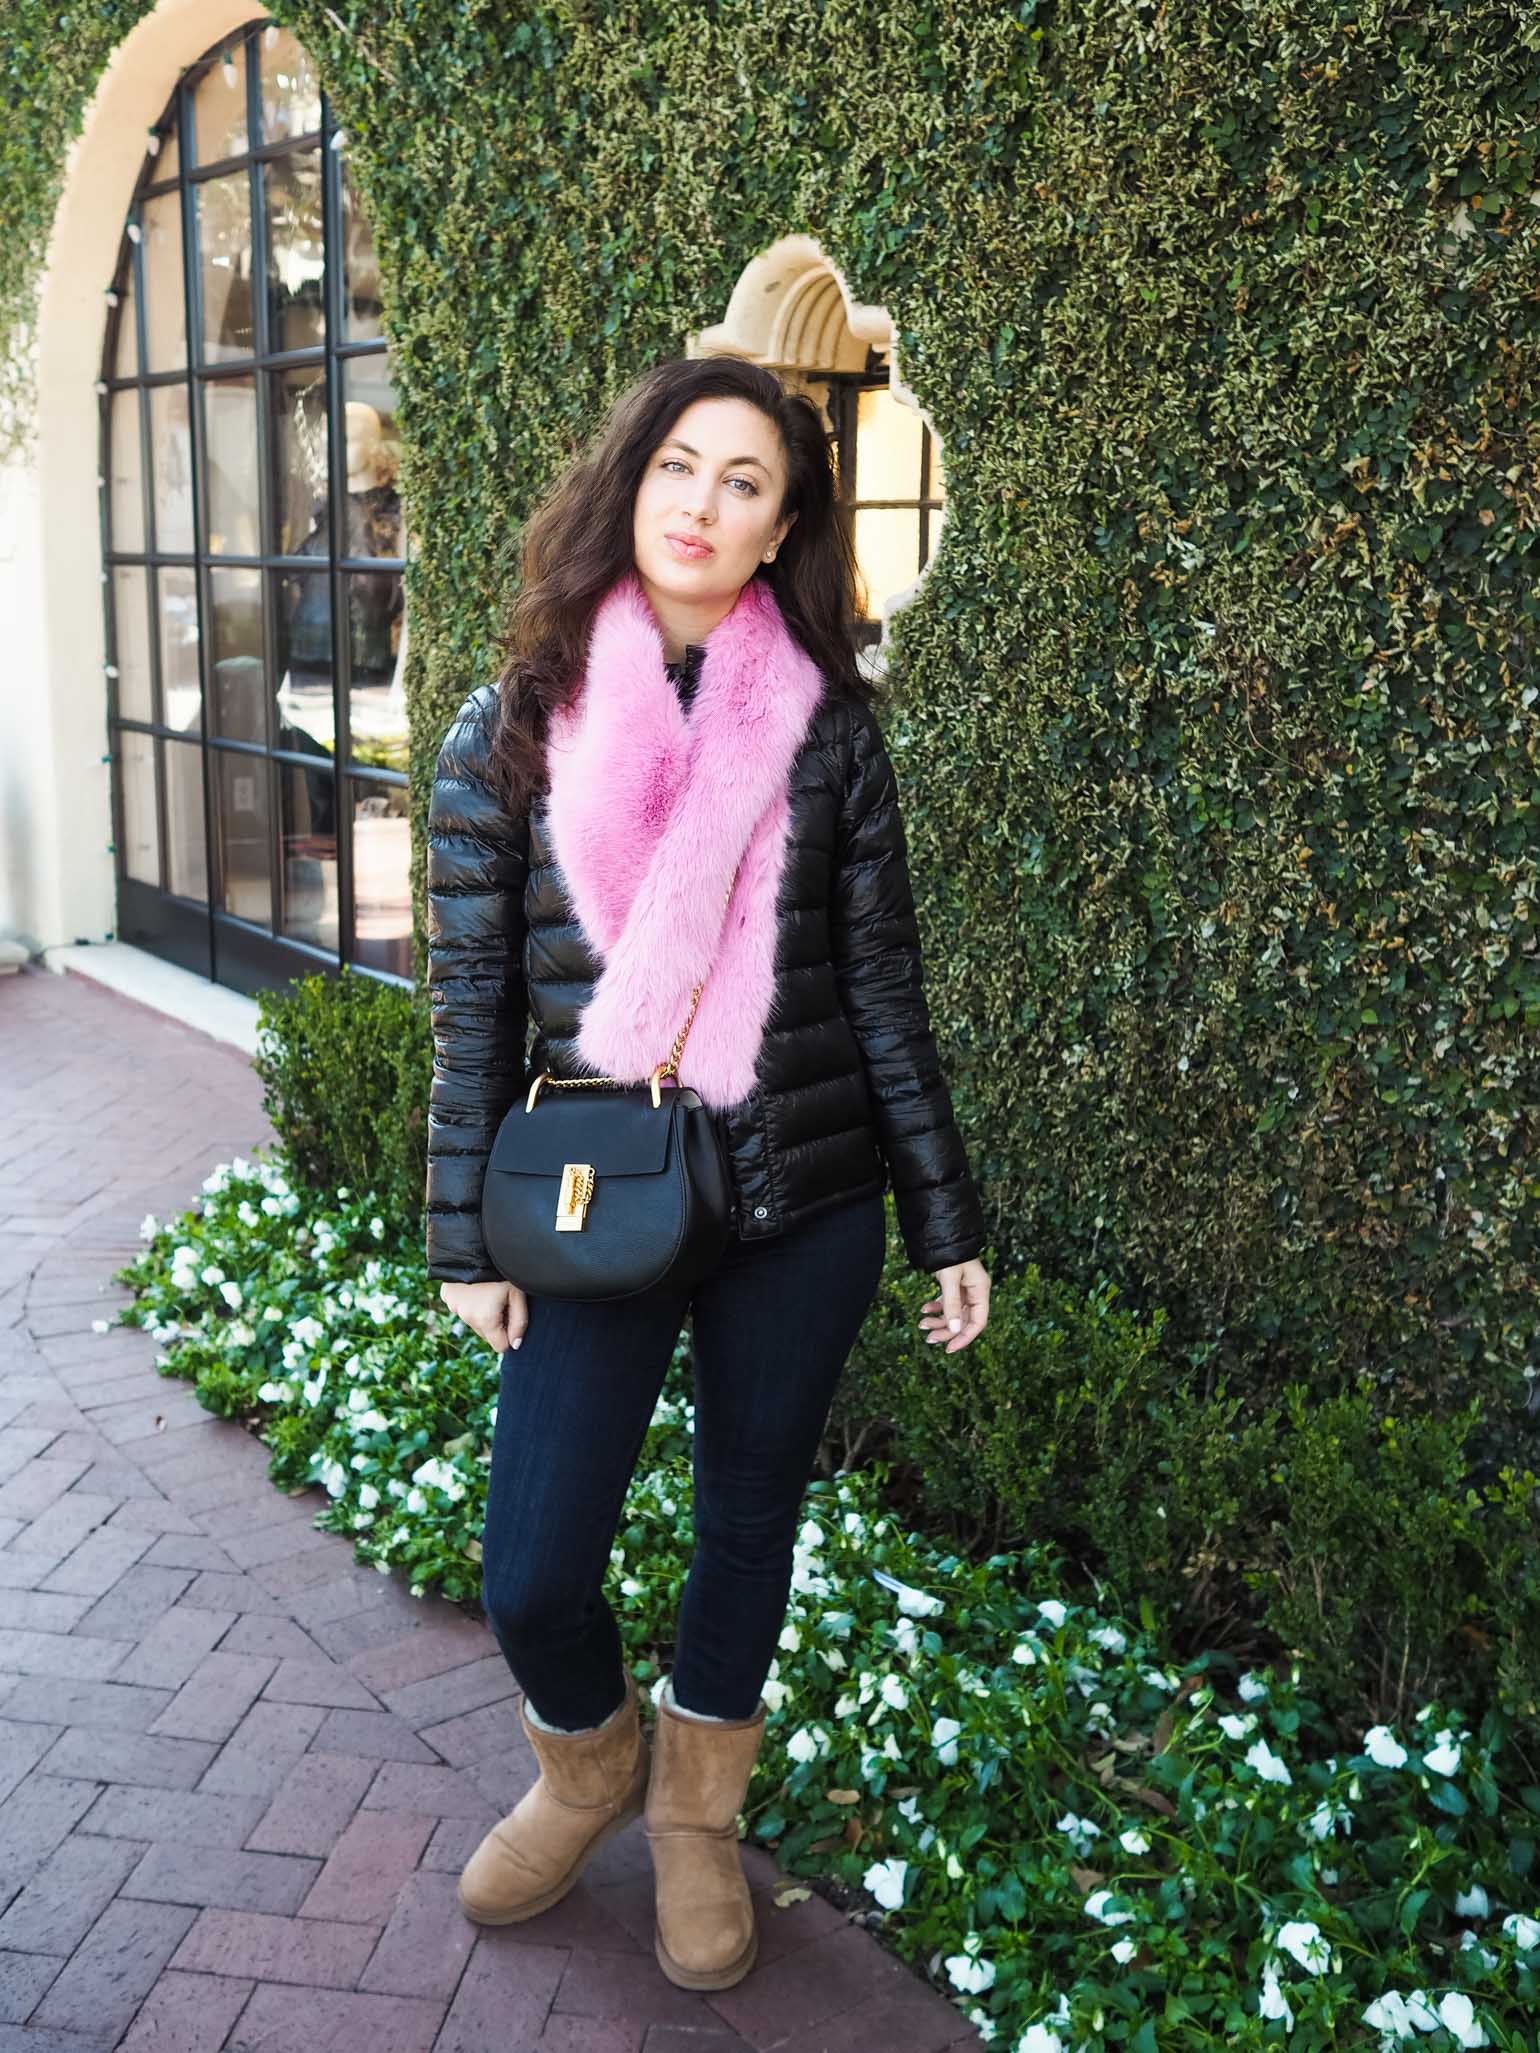 Dallas fashion blogger style; Max & Co puffer jacket, NYDJ dark wash jeans, UGG boots, J.Crew faux fur stole, and Chloe Drew